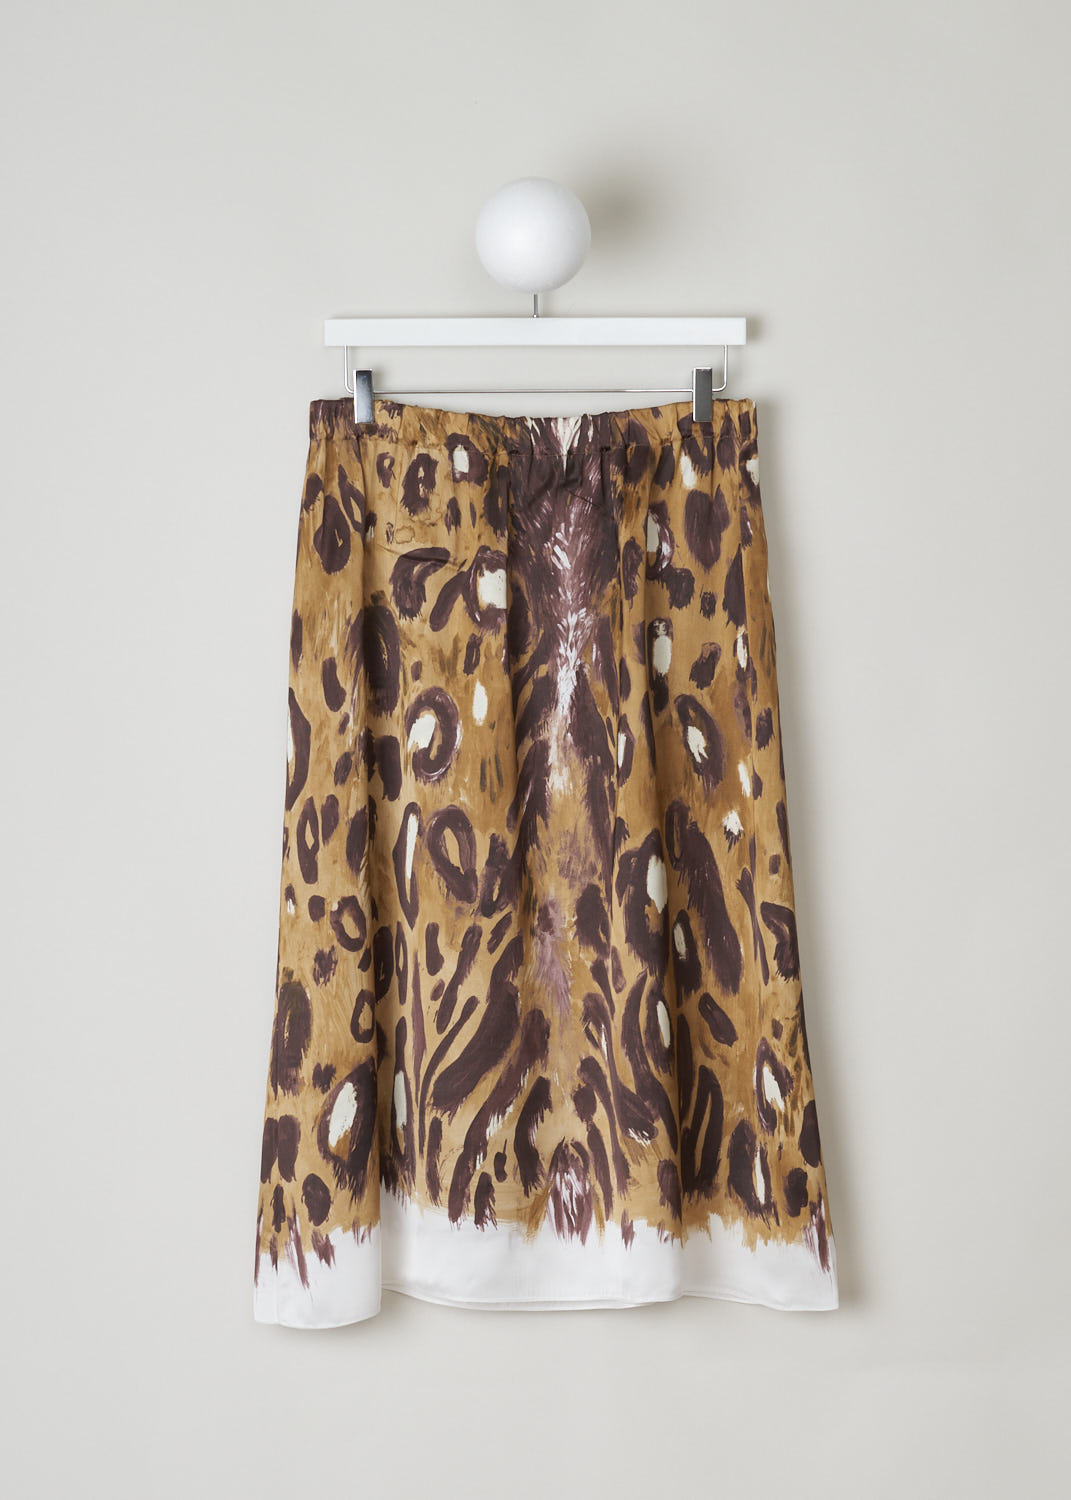 MARNI, SATIN ANIMAL PRINT MIDI SKIRT, Print, Brown, Front,This loose fitting midi skirt is made in a satin animal print. The skirt has an elasticated waistline for a comfortable fit. 
